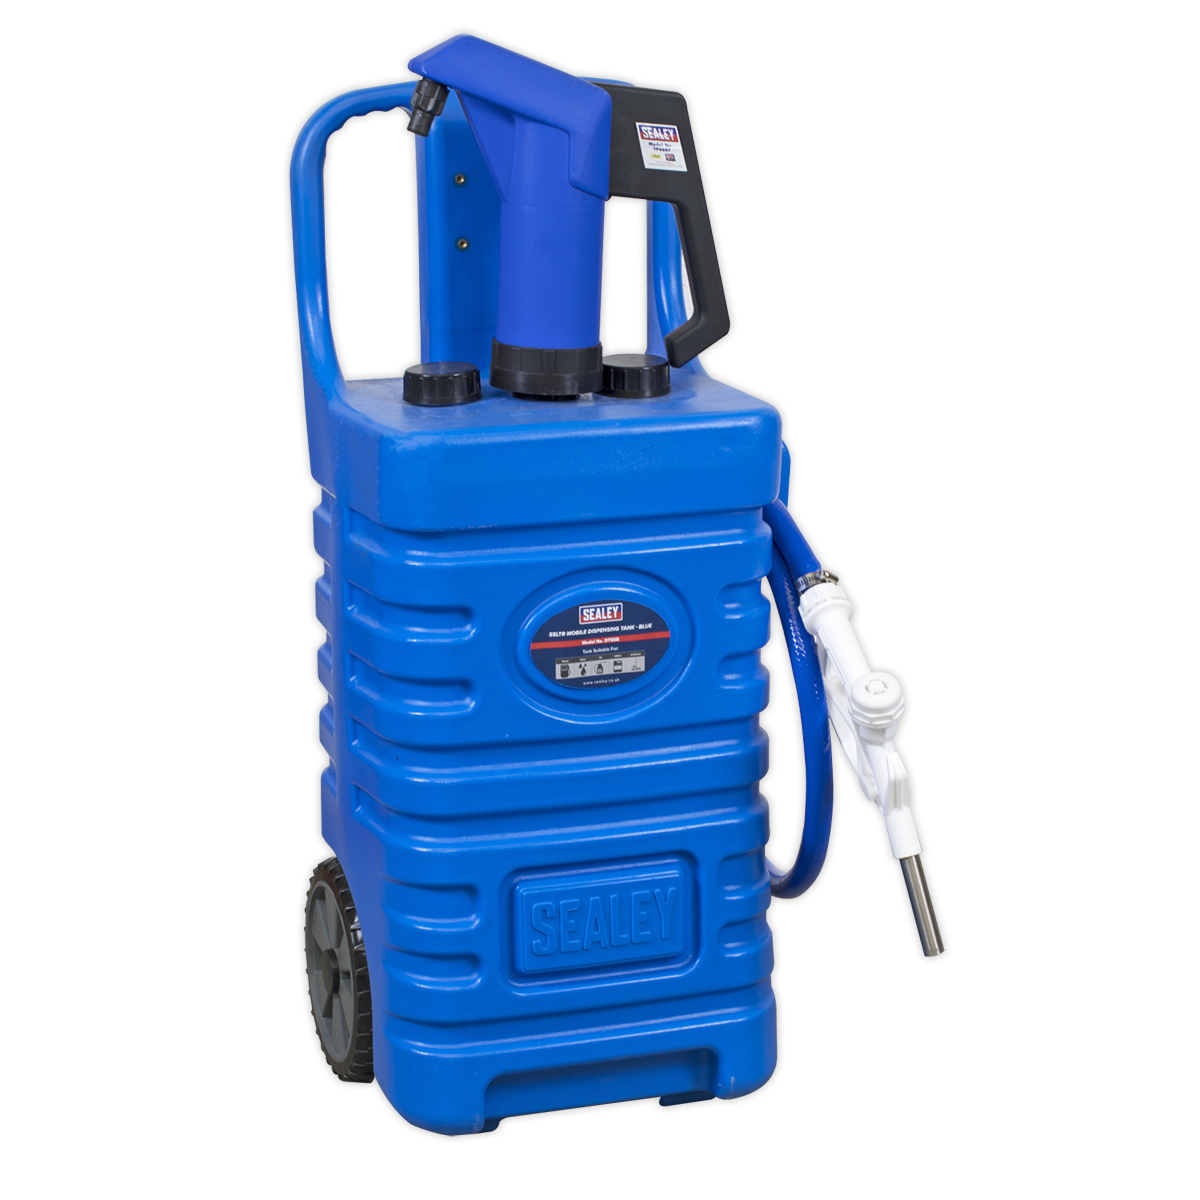 Portable pump for Diesel, Oil, AdBlue®, Water and Antifreeze DT55BCOMBO1